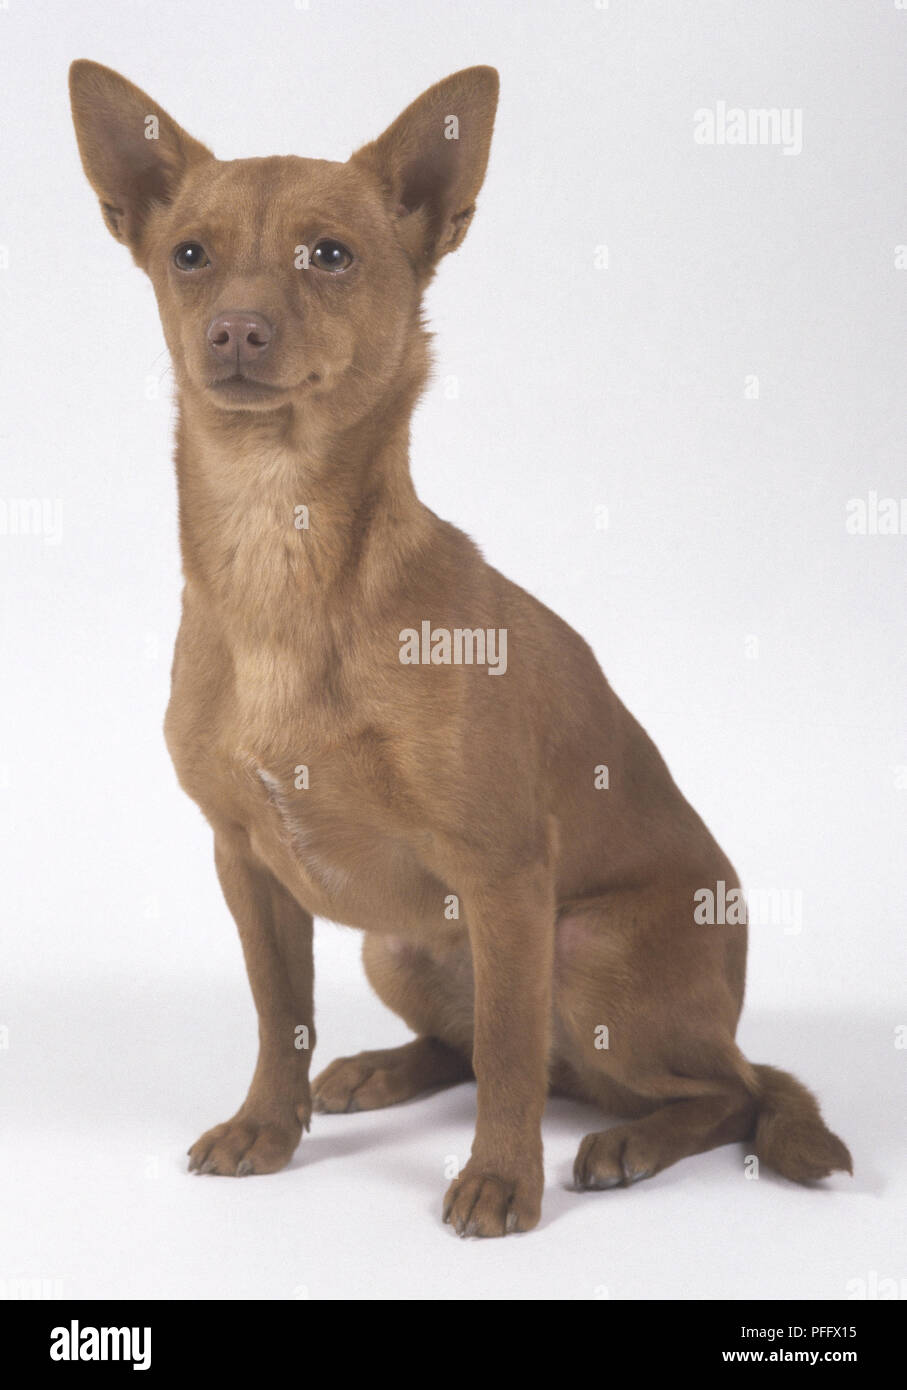 A small sitting Portuguese Podengo dog with a short brown coat and large triangular ears Stock Photo